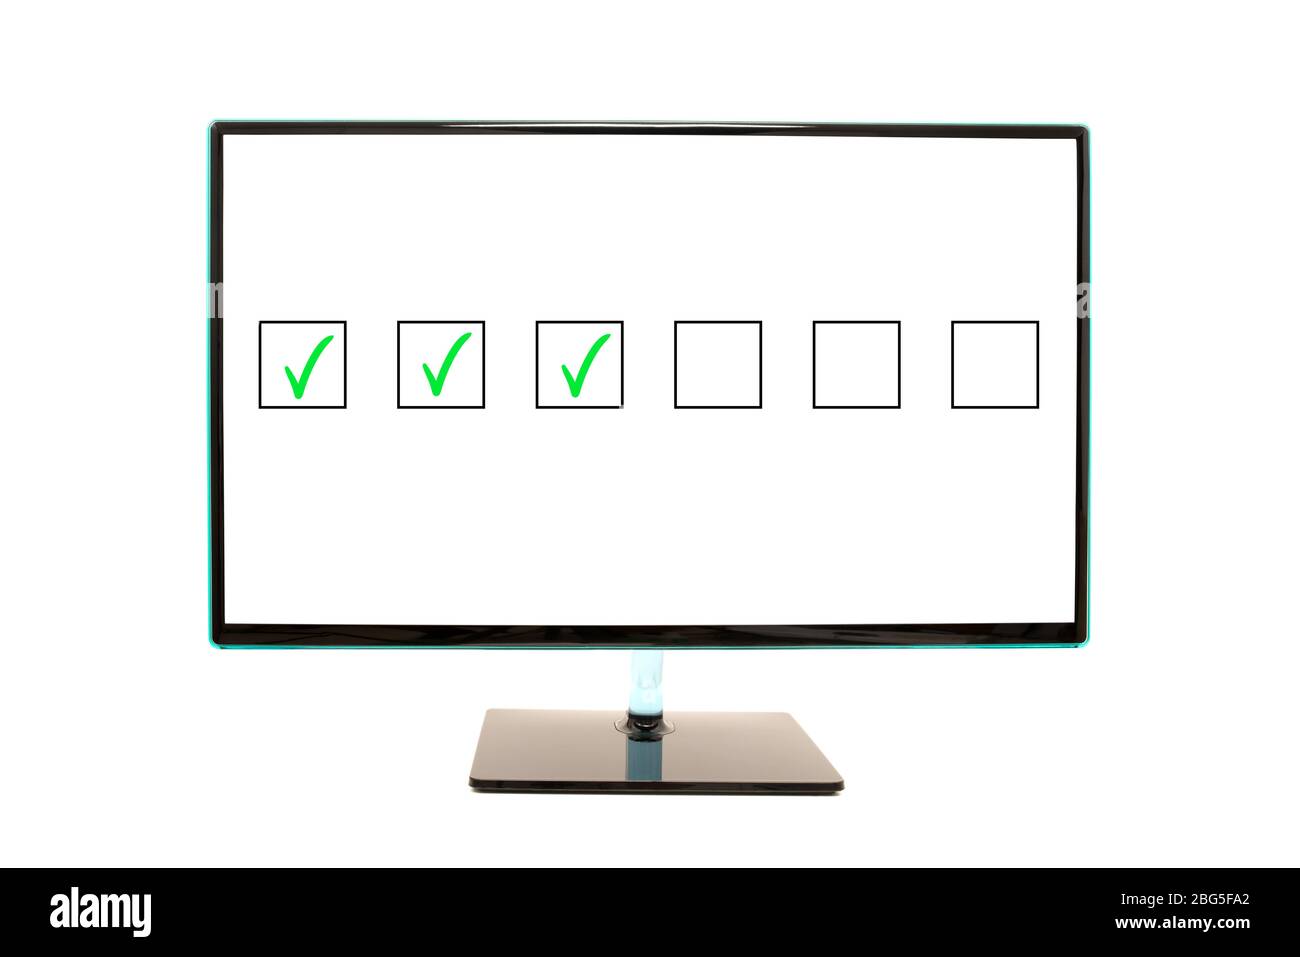 Flat Wide Monitor Screen on Stand Flashing Check Boxes. Stock Photo